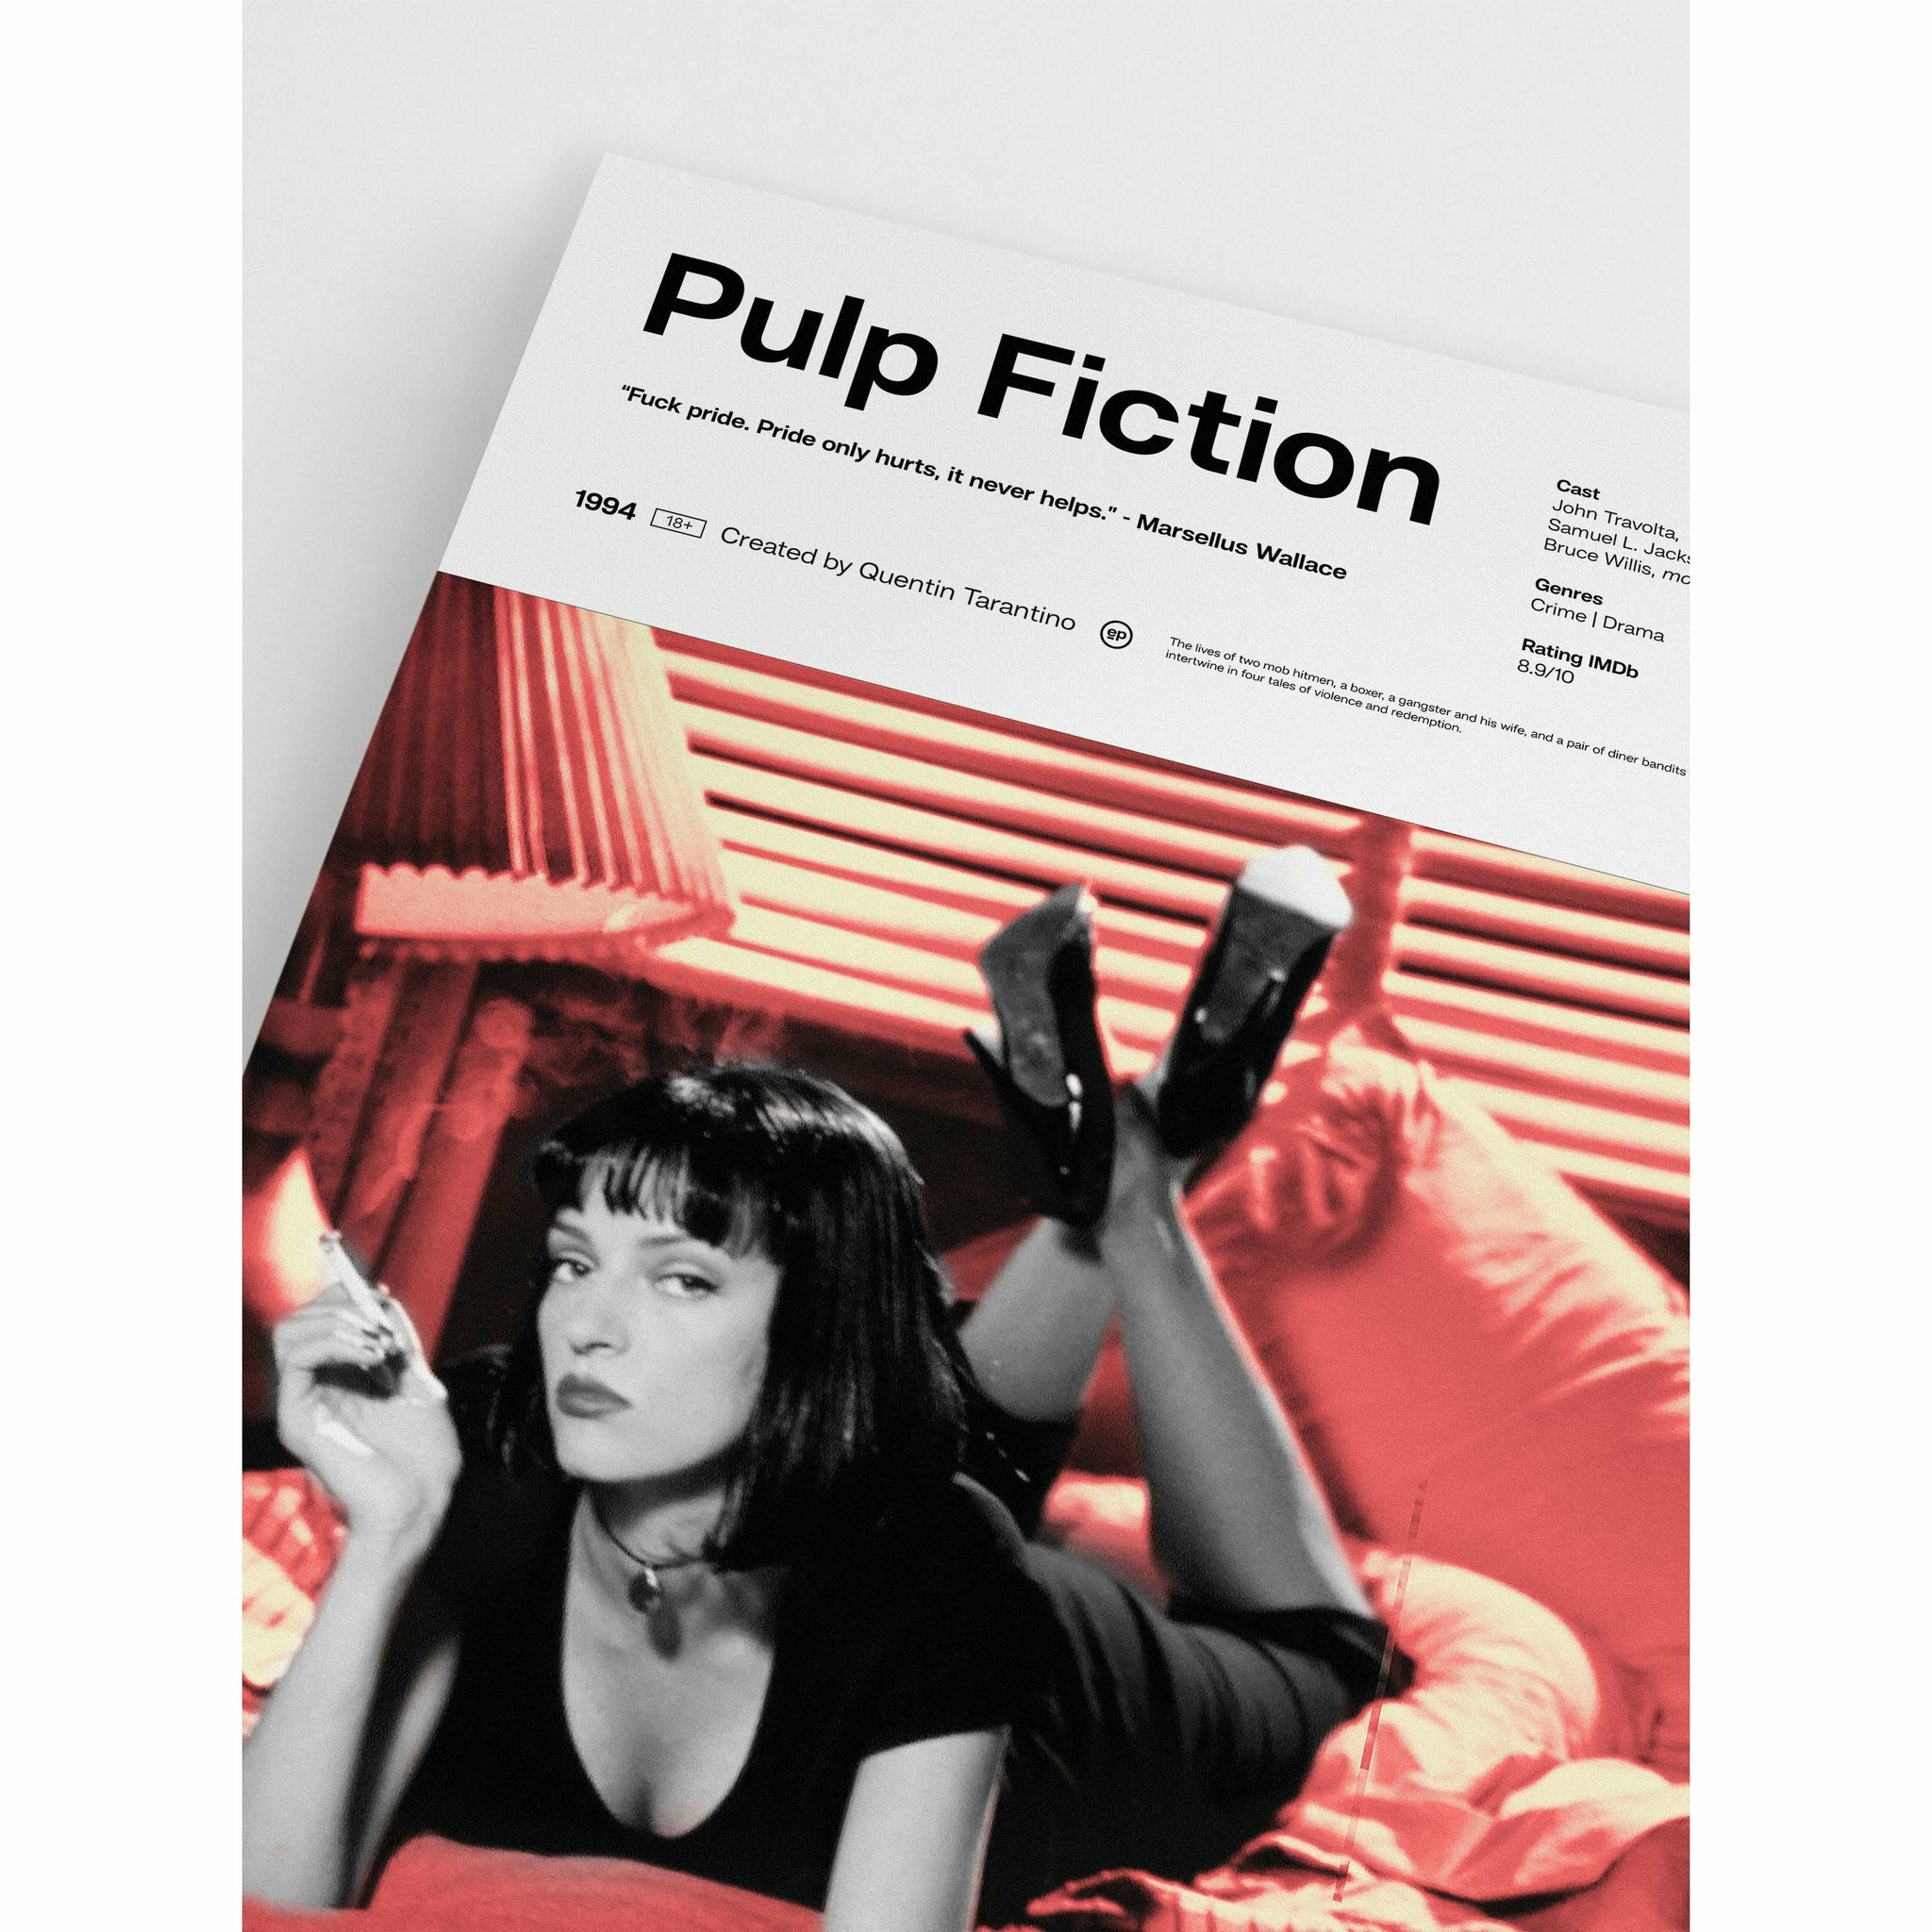 Pulp fiction Poster